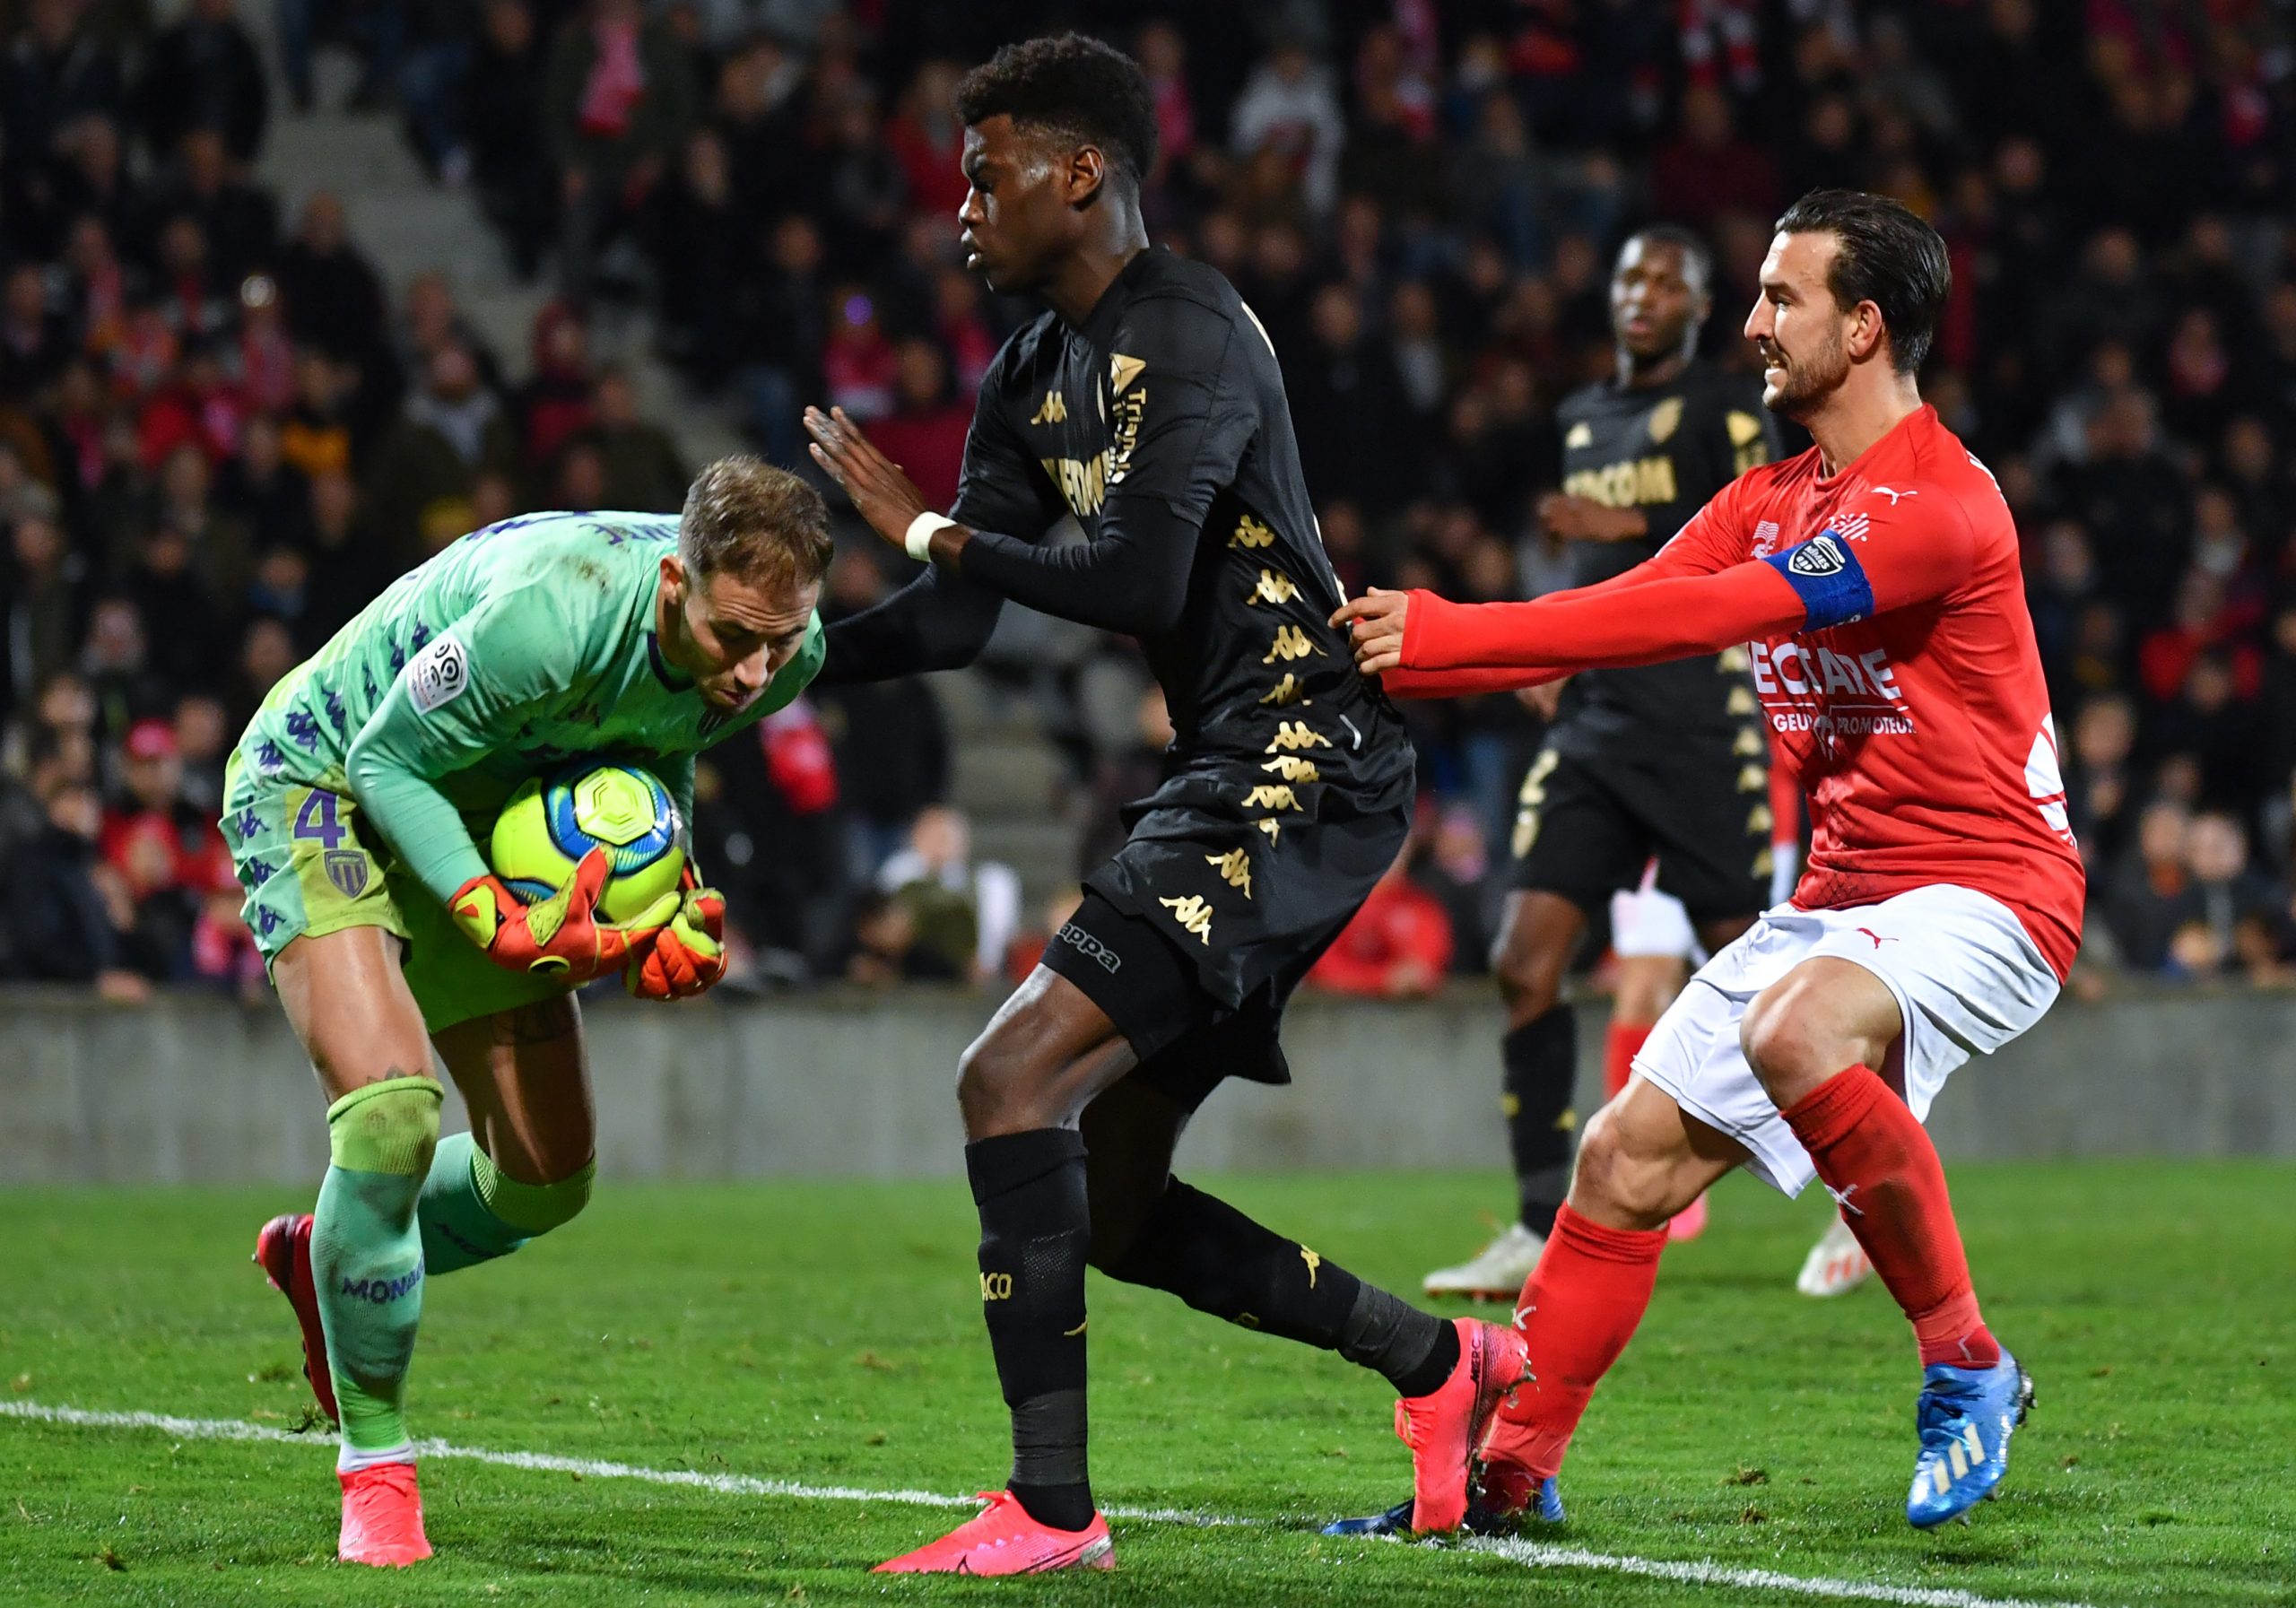 Monaco's French goalkeeper Benjamin Lecomte (L) stops  the ball in front of Monaco's French midfiedler Benoît Badiashile (C) and Nimes' French defender Pablo Martinez (R)  during the French L1 football match between Nimes (NO) and Monaco (ASM) on February 1, 2020, at the Costieres Stadium in Nimes, southern France. (Photo by PASCAL GUYOT/AFP via Getty Images)